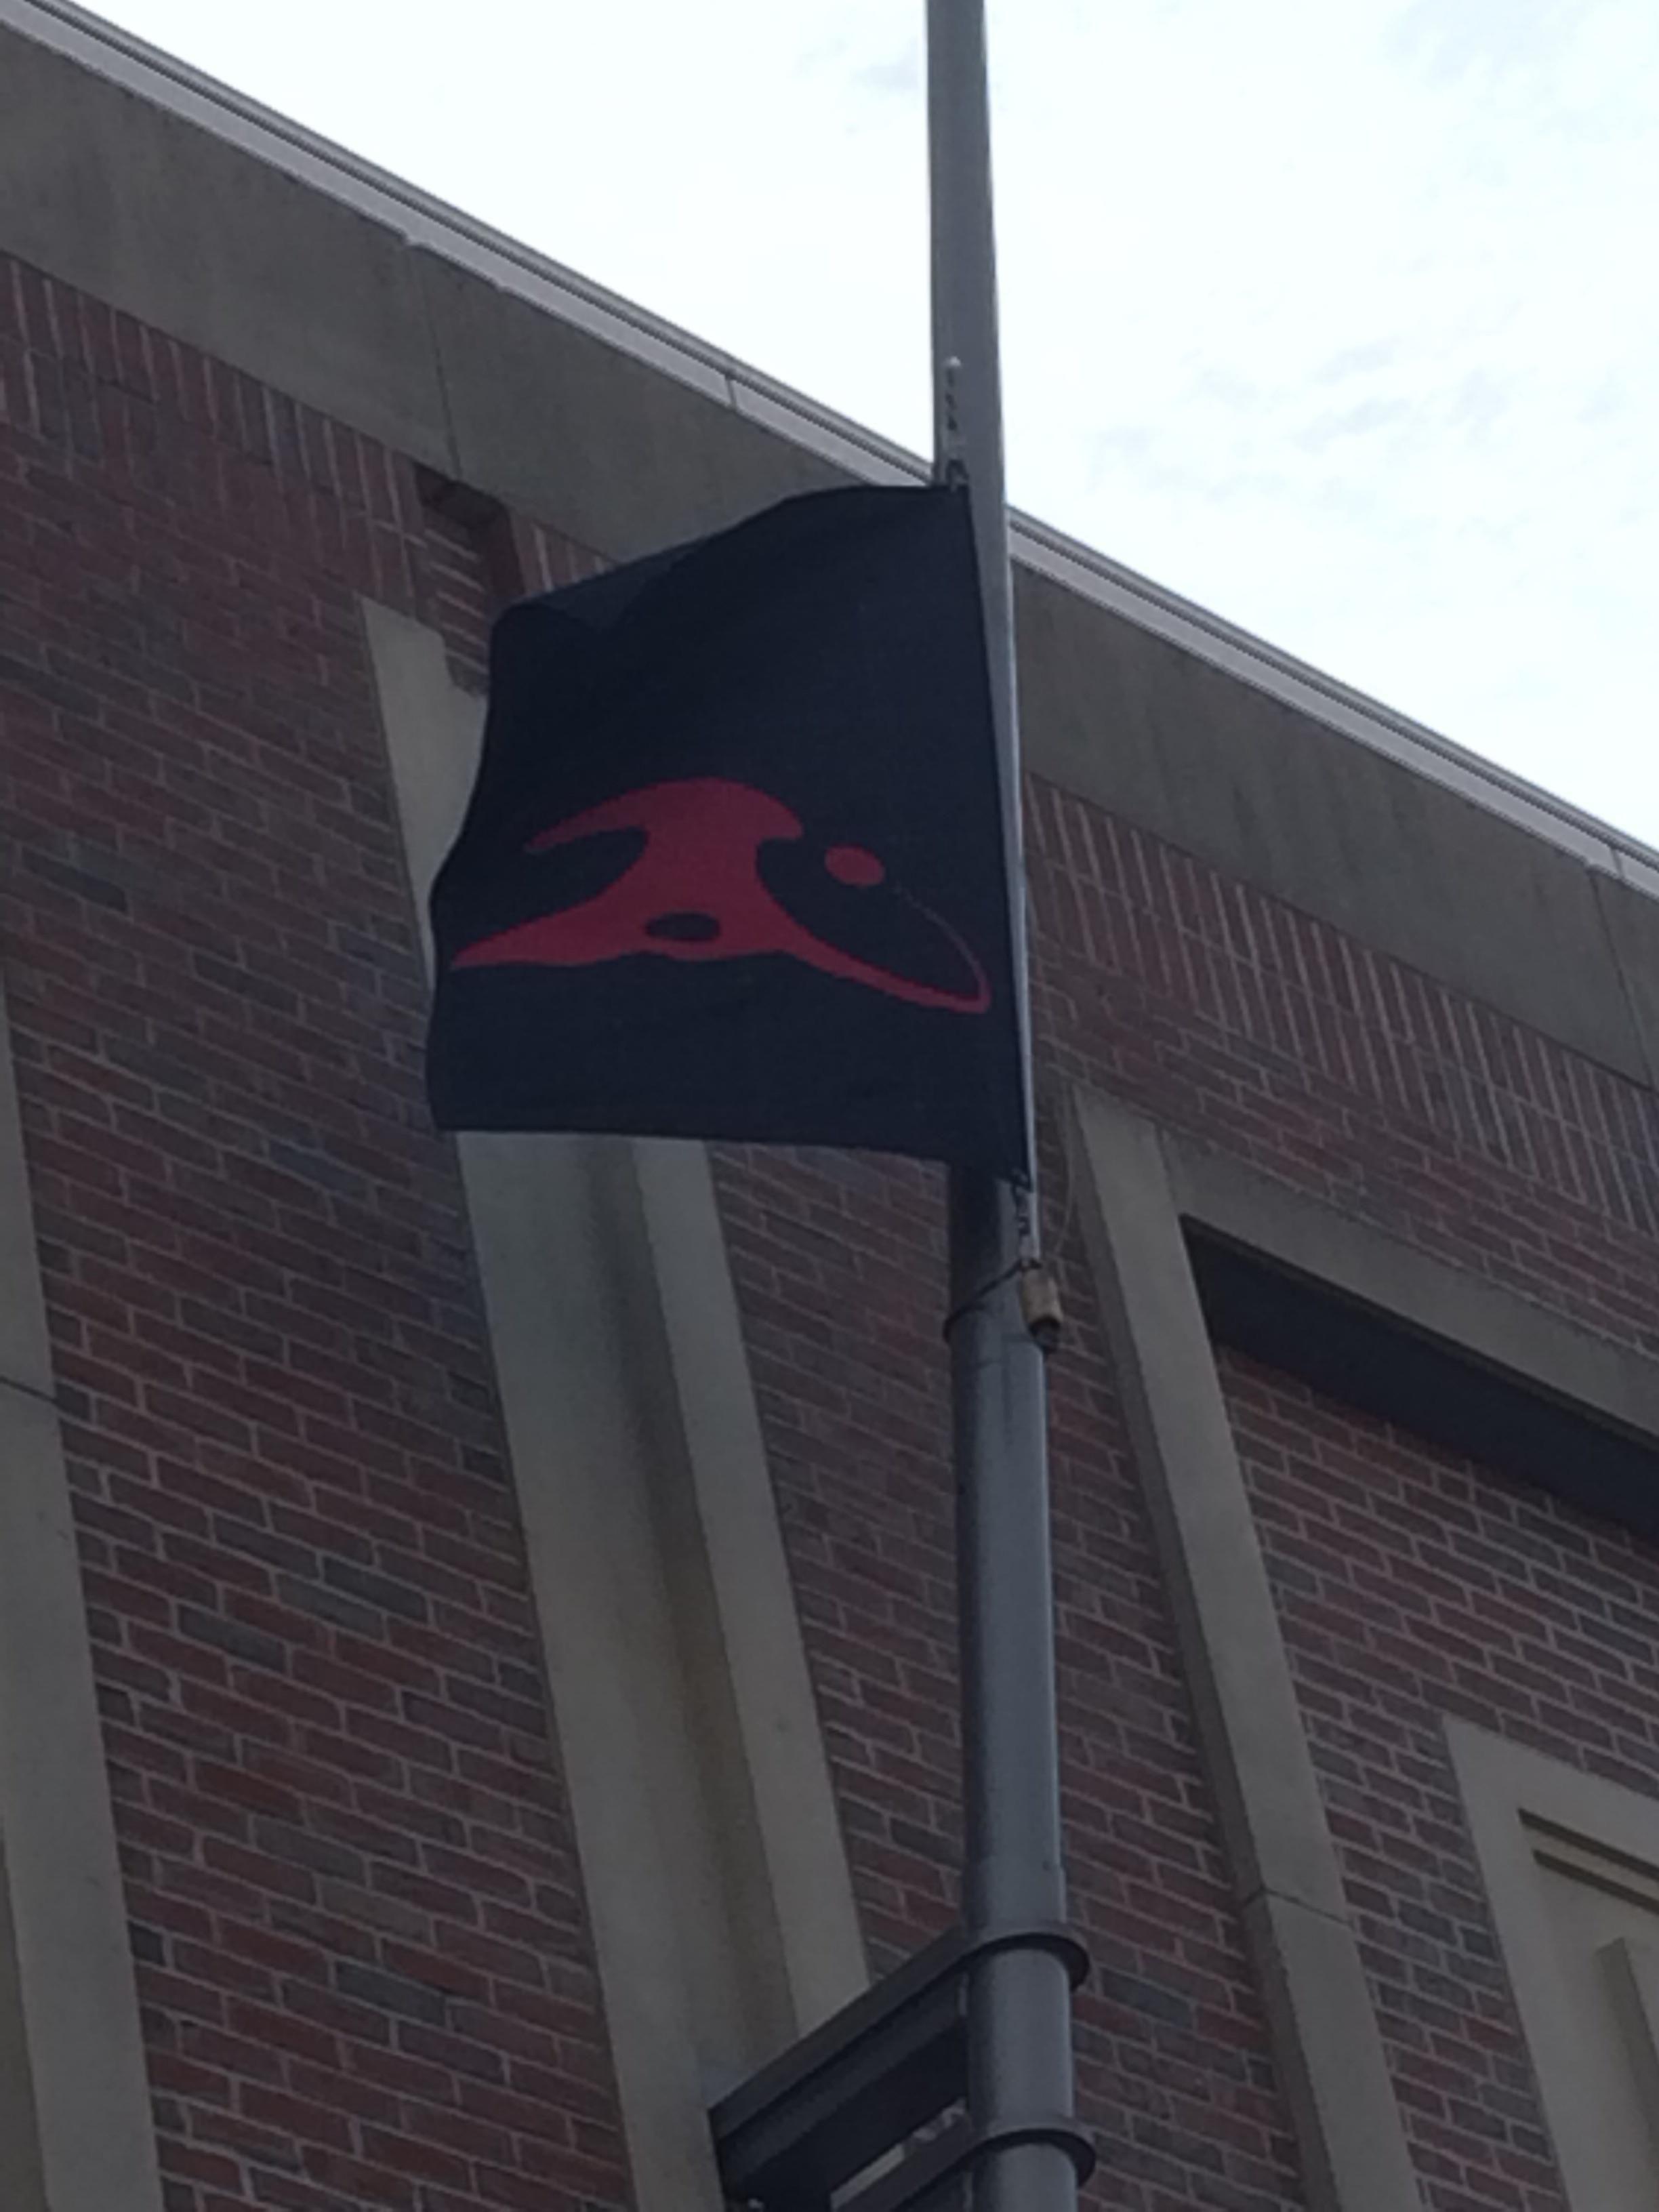 Mousesports Logo - The Mousesports logo is upside down on their flag outside the arena